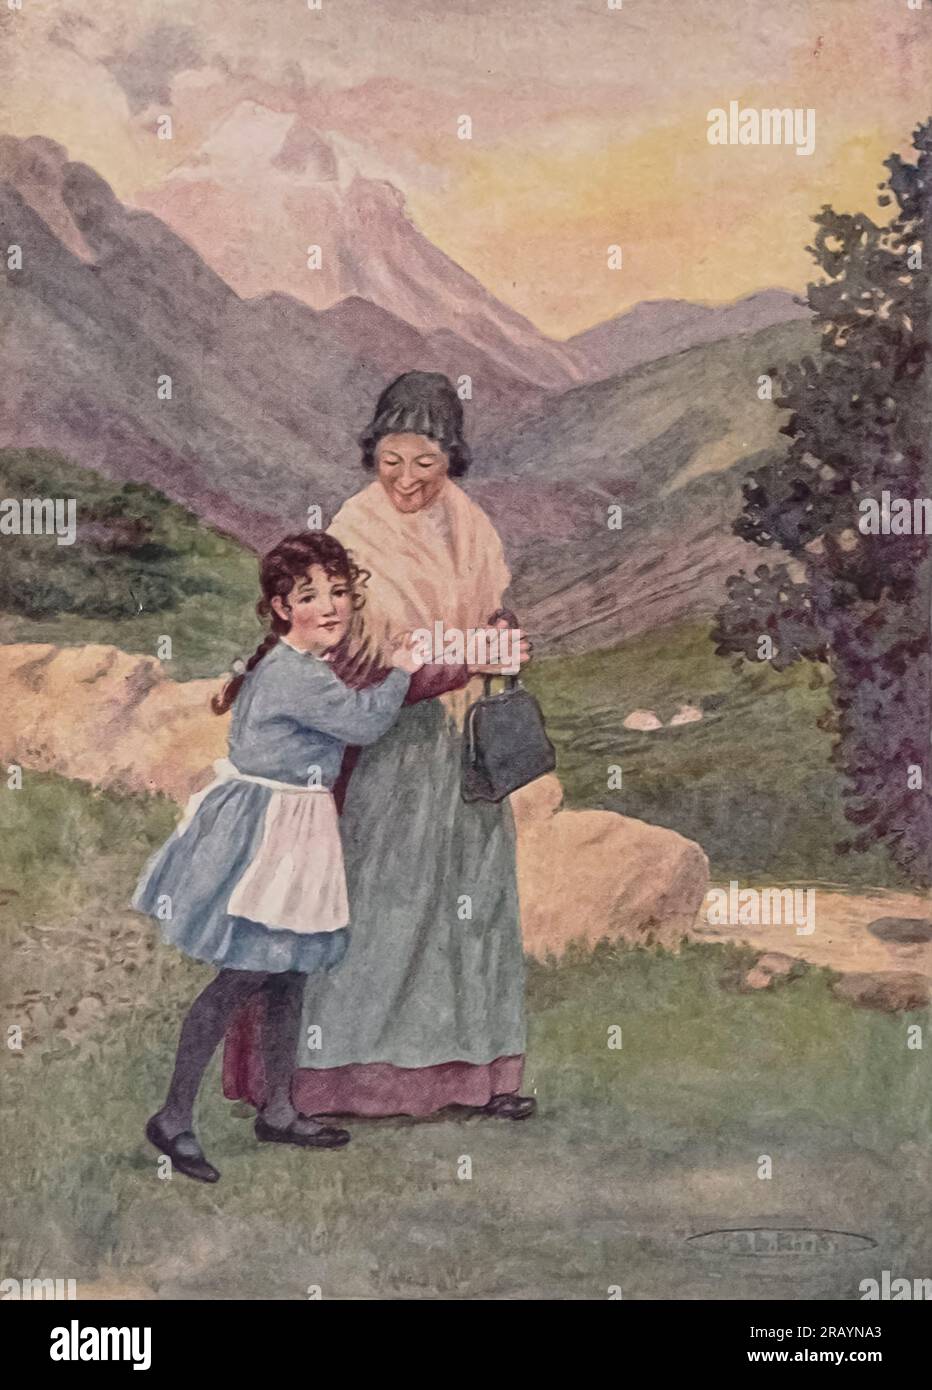 Cornelli Hung on Her Arm, and Together They Wandered Forth in the Beautiful Evening illustrated by Maria L. Kirk from the book ' Cornelli; a story of the Swiss Alps ' by Spyri, Johanna, 1827-1901 Publication date 1921 Publisher Philadelphia, London, J.B. Lippincott company. Johanna Louise Spyri (12 June 1827 – 7 July 1901) was a Swiss author of novels, notably children's stories. She wrote the popular book Heidi. Born in Hirzel, a rural area in the canton of Zürich, as a child she spent several summers near Chur in Graubünden, the setting she later would use in her novels. Stock Photo